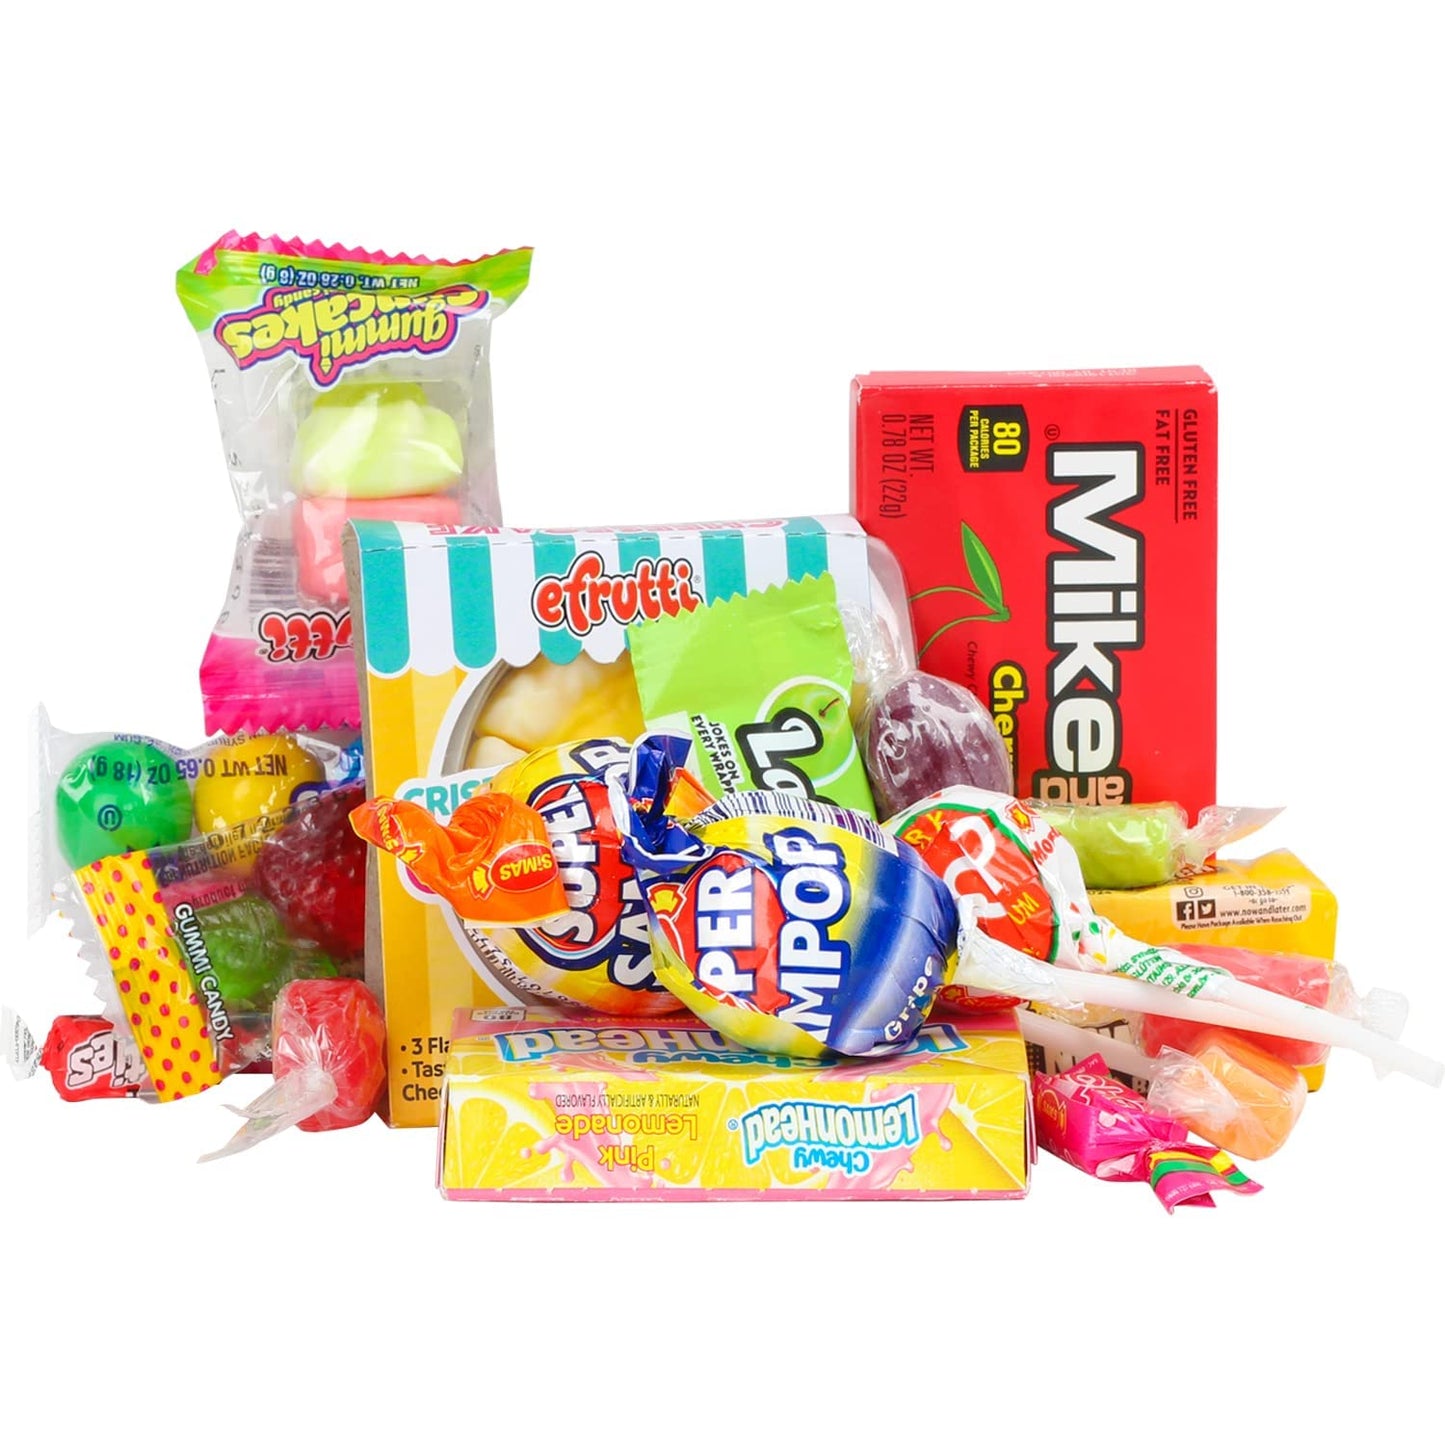 Bulk Candy Mix - 9 Pounds - Candy Variety Pack - Assorted Classic Candy - Individually Wrapped Candies - Fun Size Candy Assortment